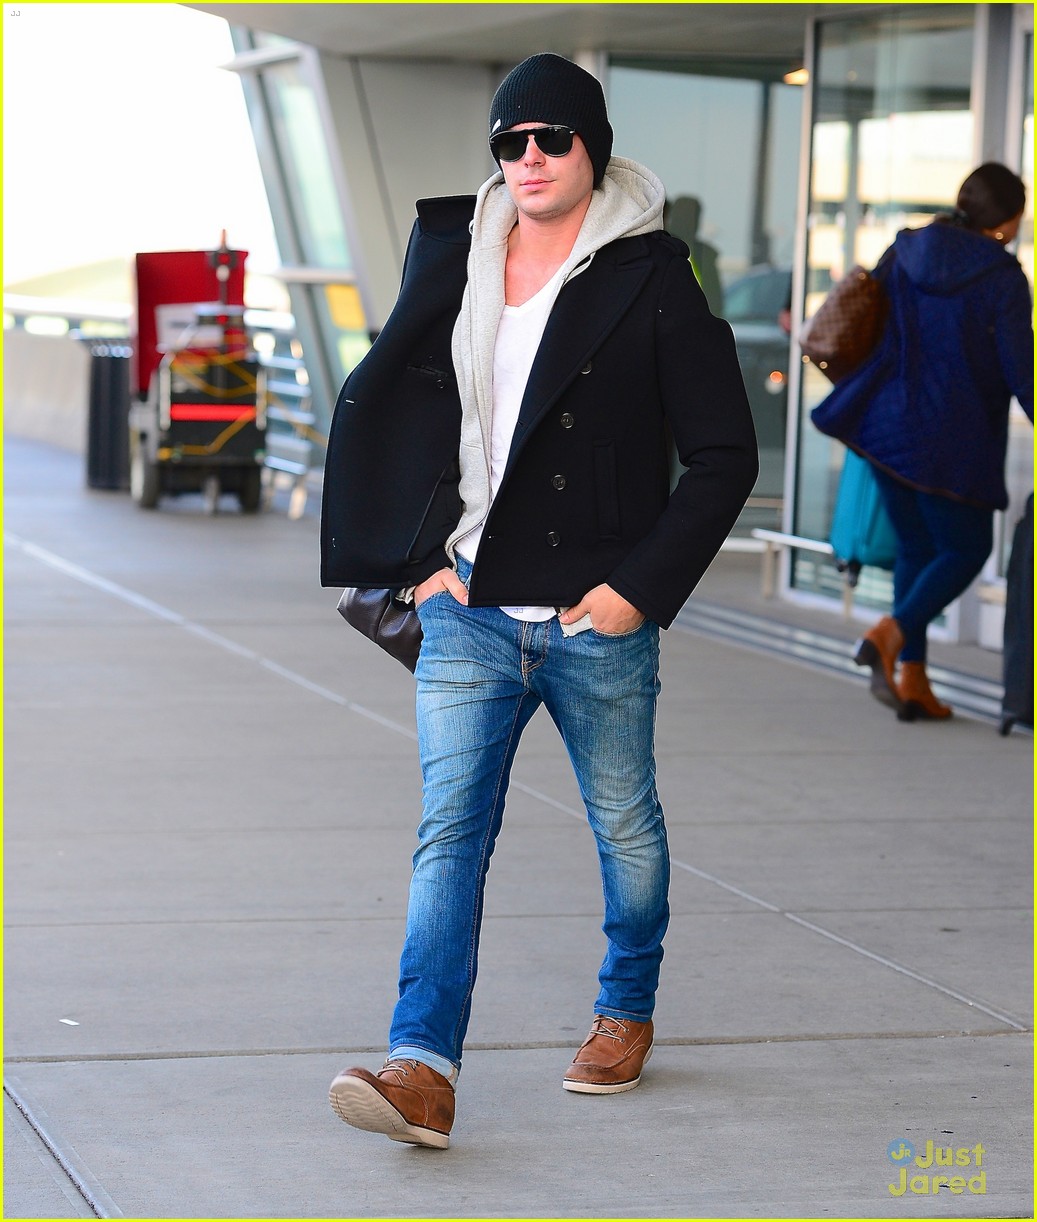 zac efron lands in new york city 01